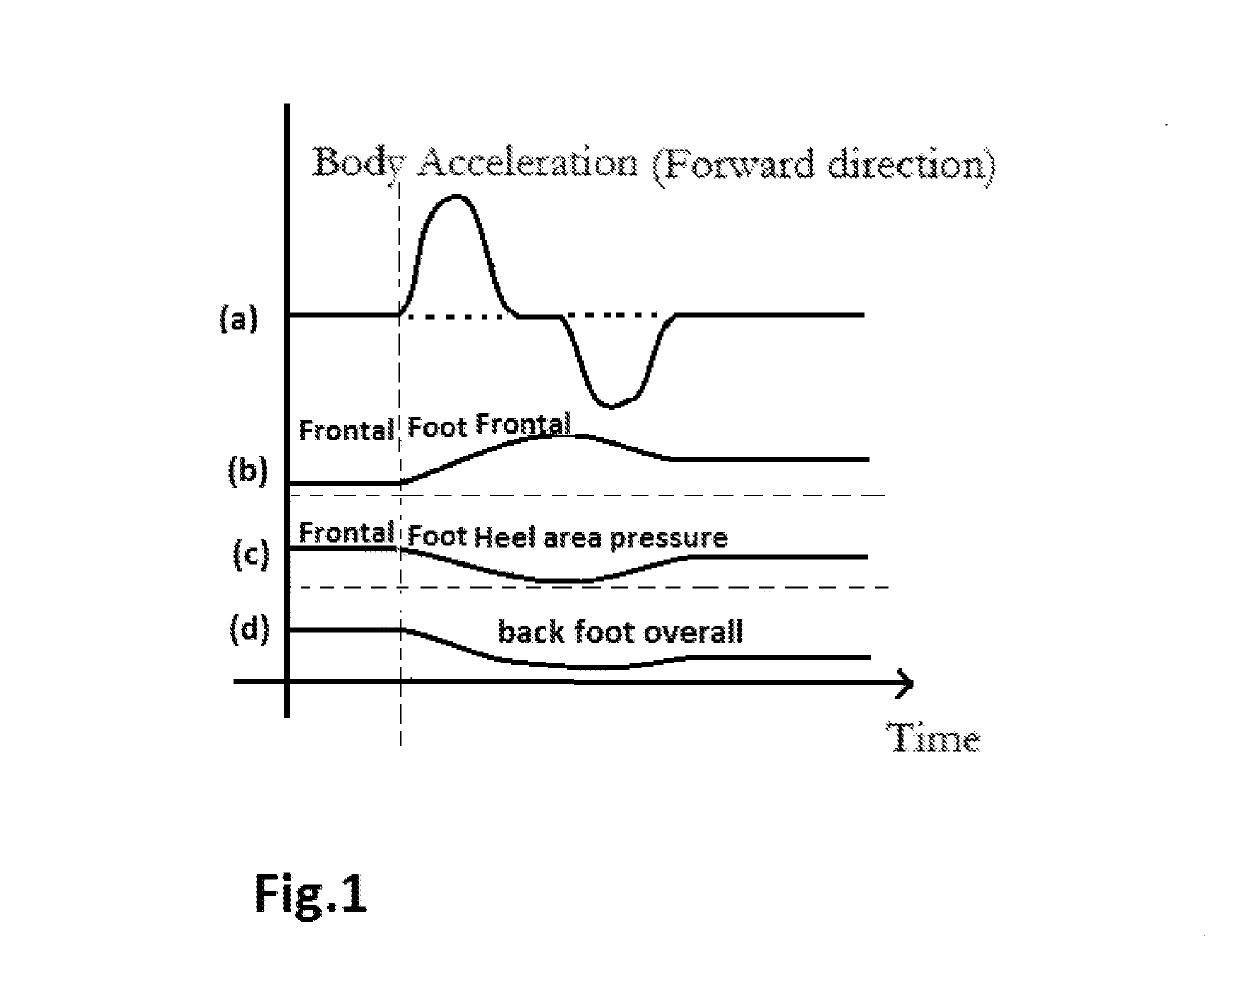 Apparatus and Method of for natural, anti-motion-sickness interaction towards synchronized Visual Vestibular Proprioception interaction including navigation (movement control) as well as target selection in immersive environments such as VR/AR/simulation/game, and modular multi-use sensing/processing system to satisfy different usage scenarios with different form of combination